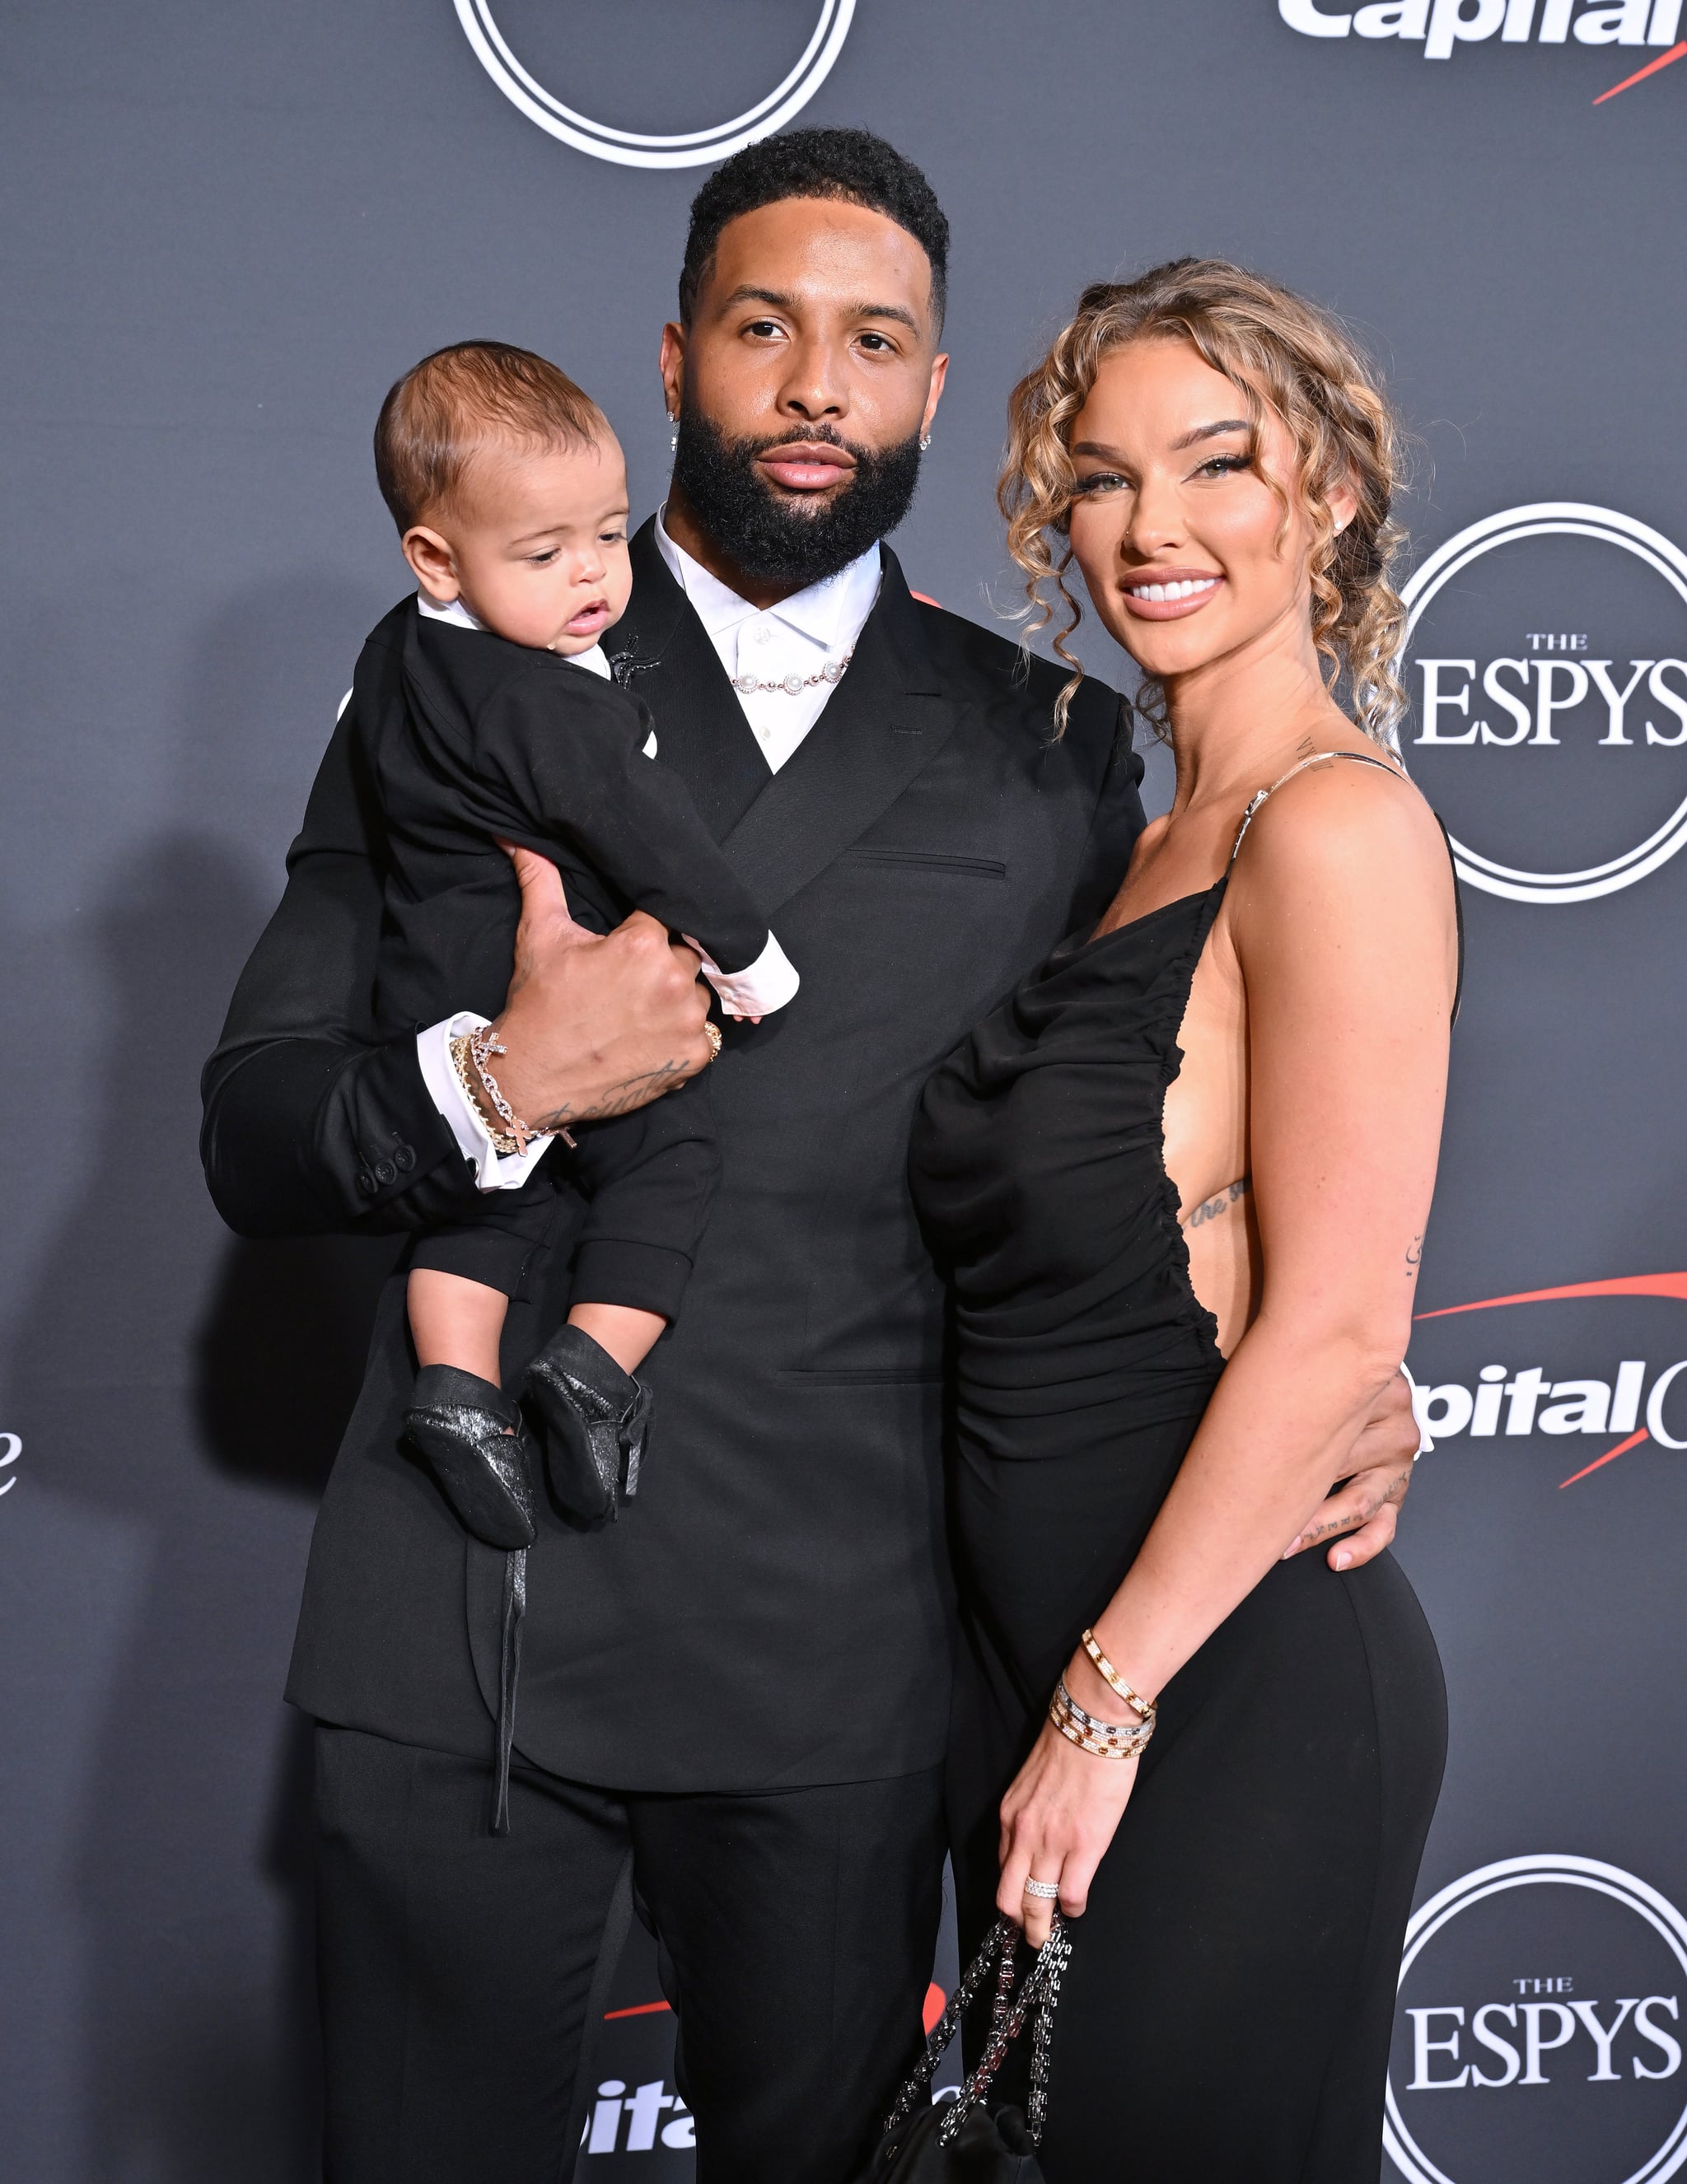 HOLLYWOOD, CALIFORNIA - JULY 20: (L-R) Zydn Beckham, Odell Beckham Jr. and Lauren Wood attend the 2022 ESPYs at Dolby Theatre on July 20, 2022 in Hollywood, California. (Photo by Axelle/Bauer-Griffin/FilmMagic)